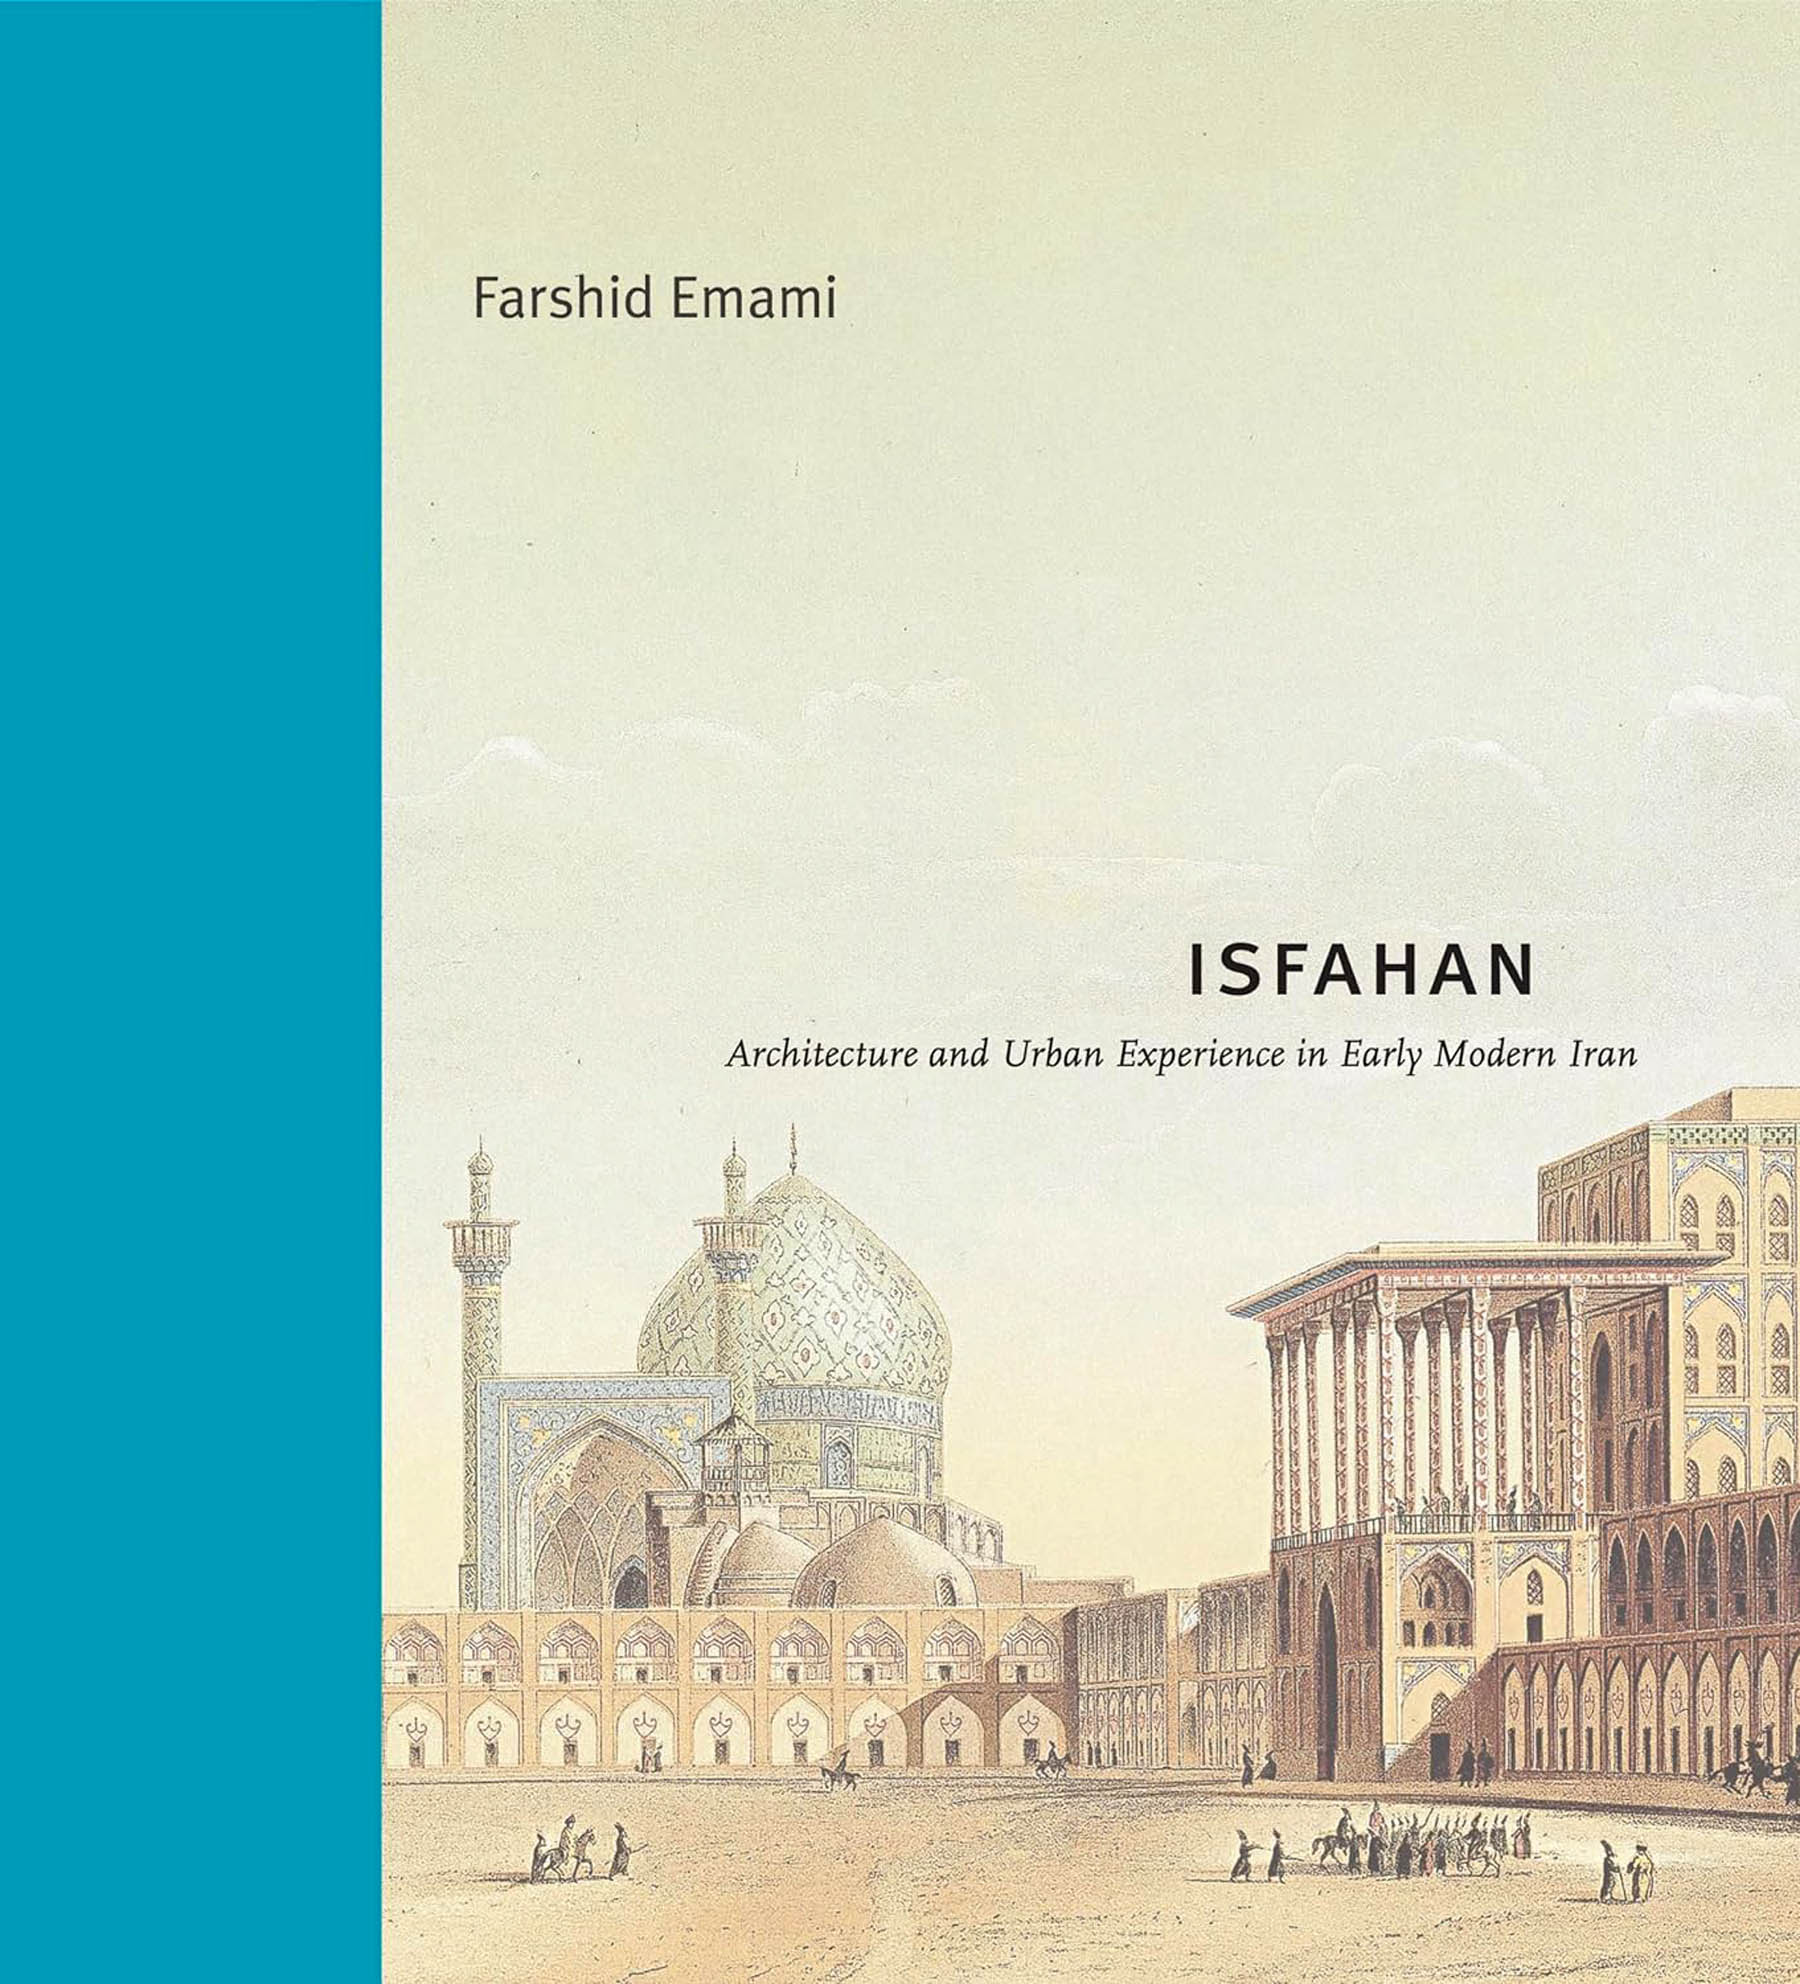 “Isfahan: Architecture and Urban Experience in Early Modern Iran”